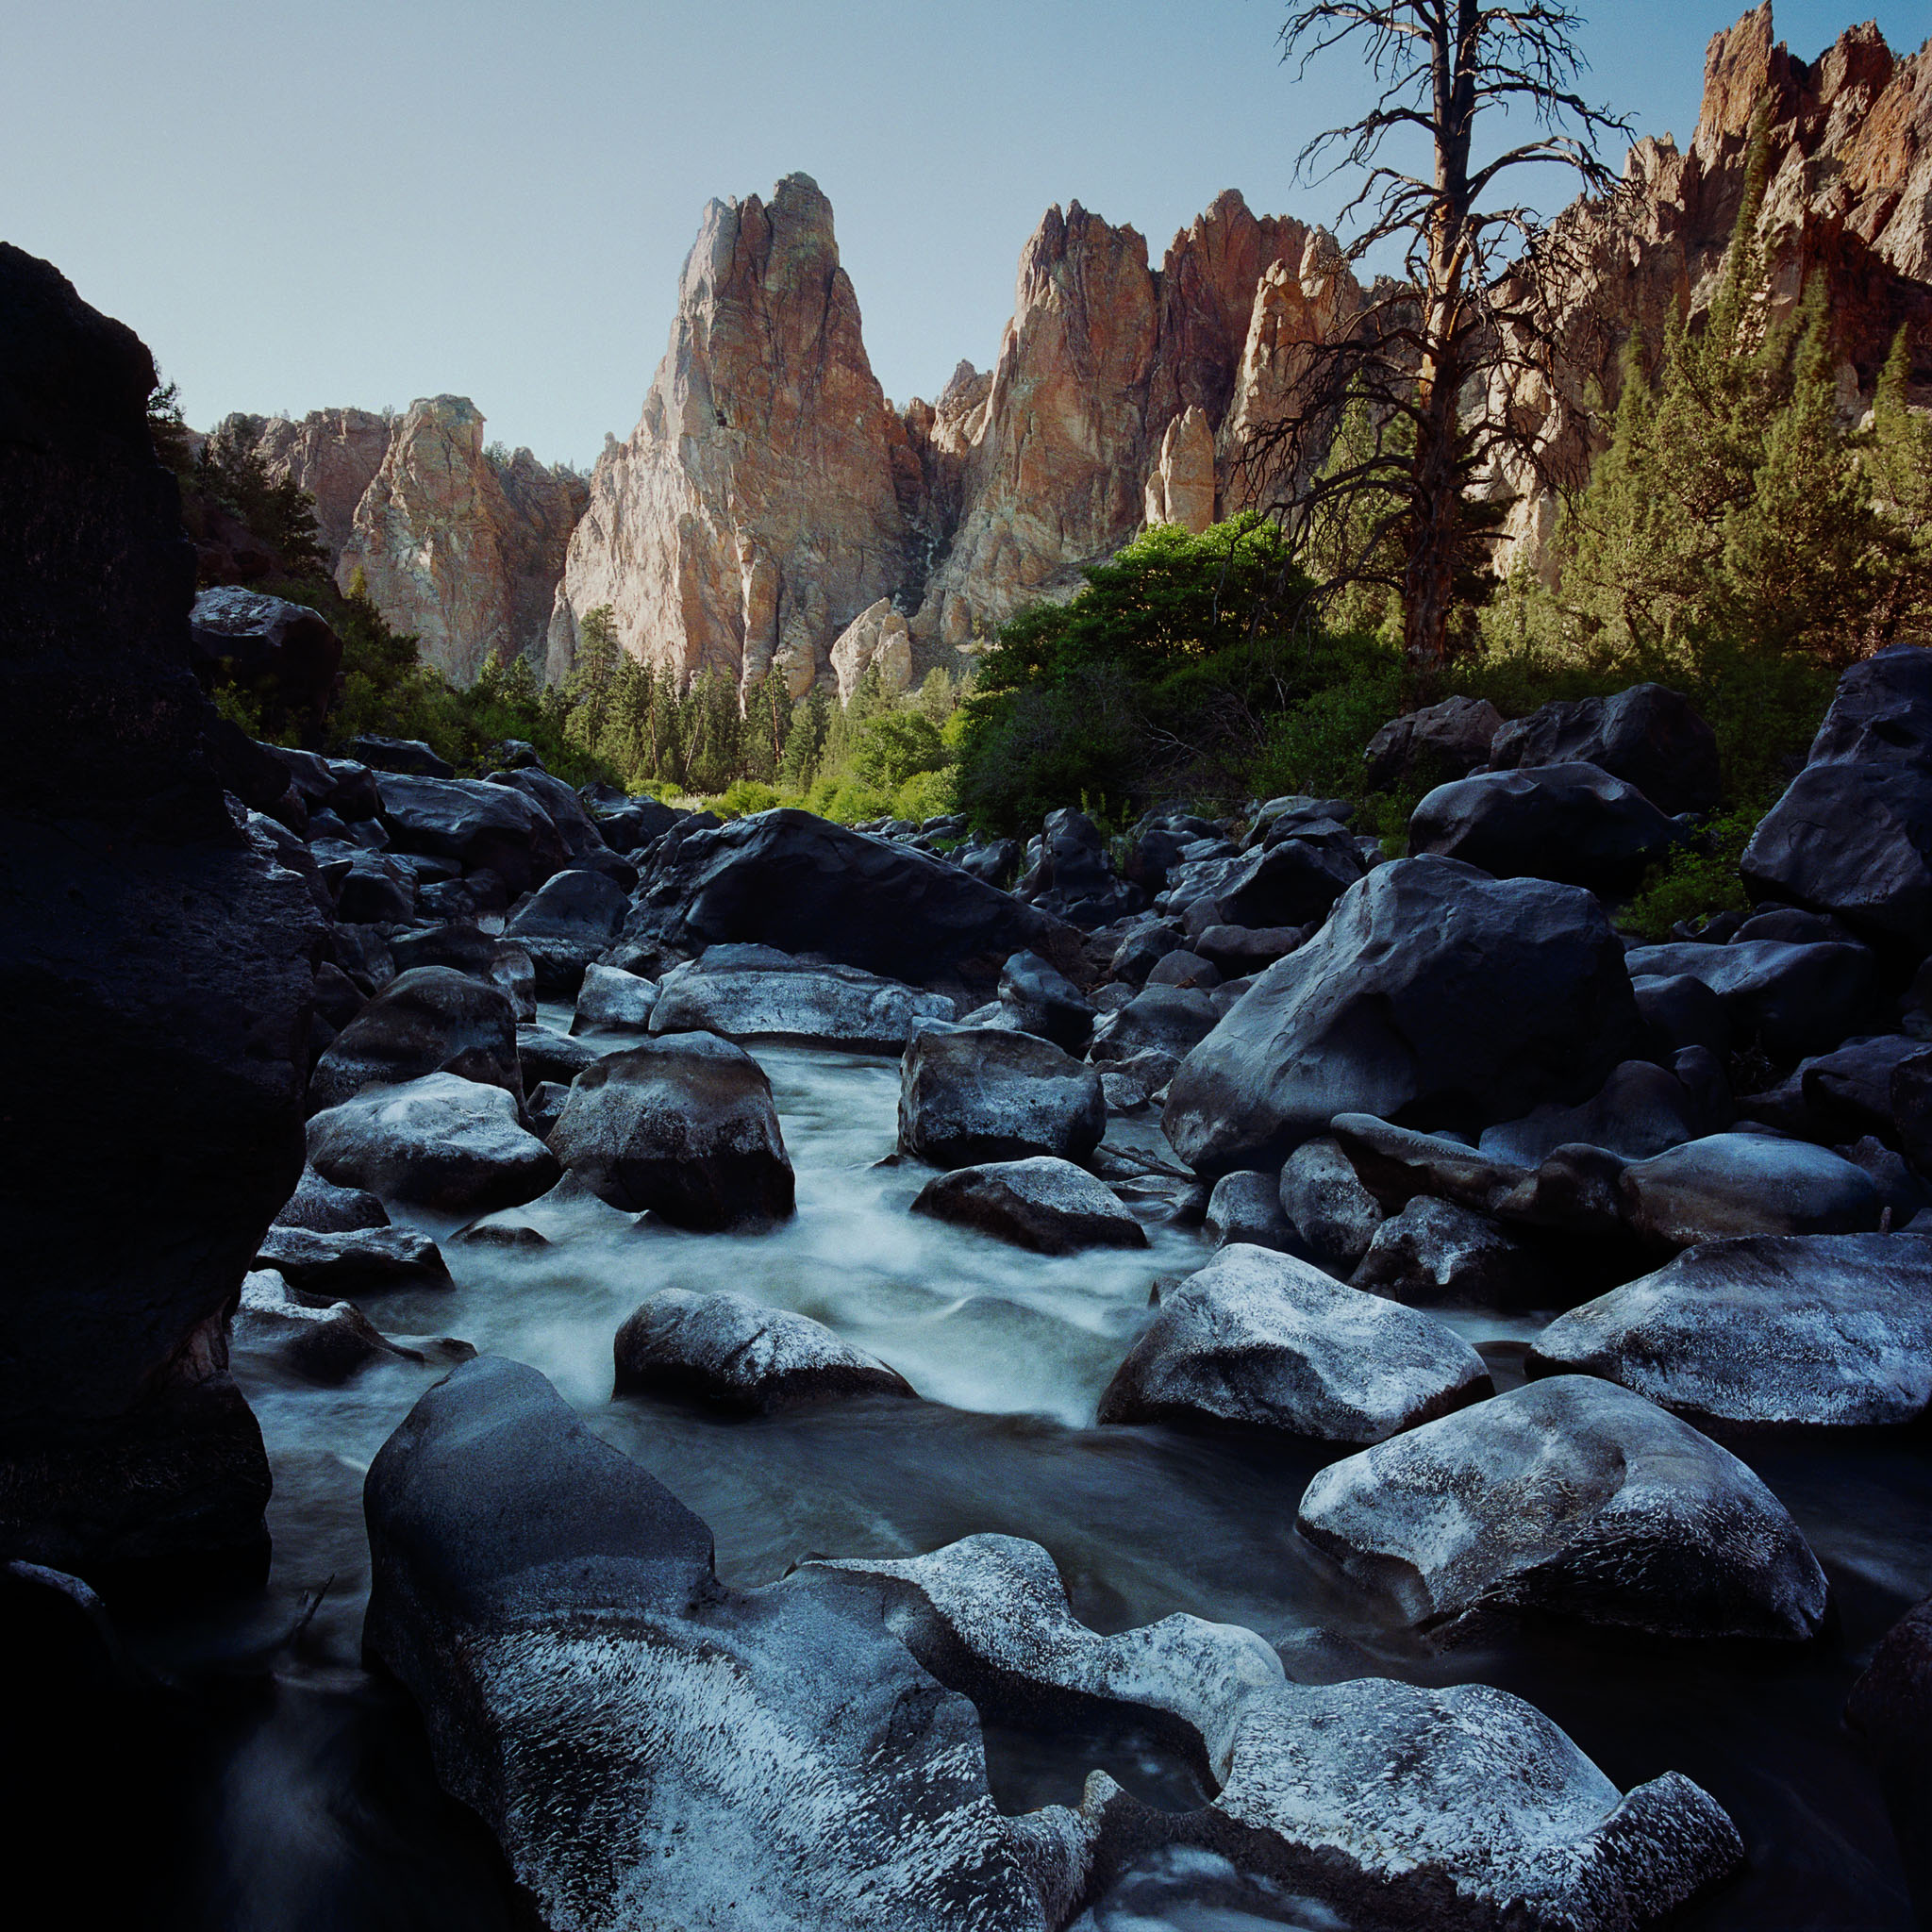 smith-rock-and-crooked-river-boulders-central-or-8x8.jpg